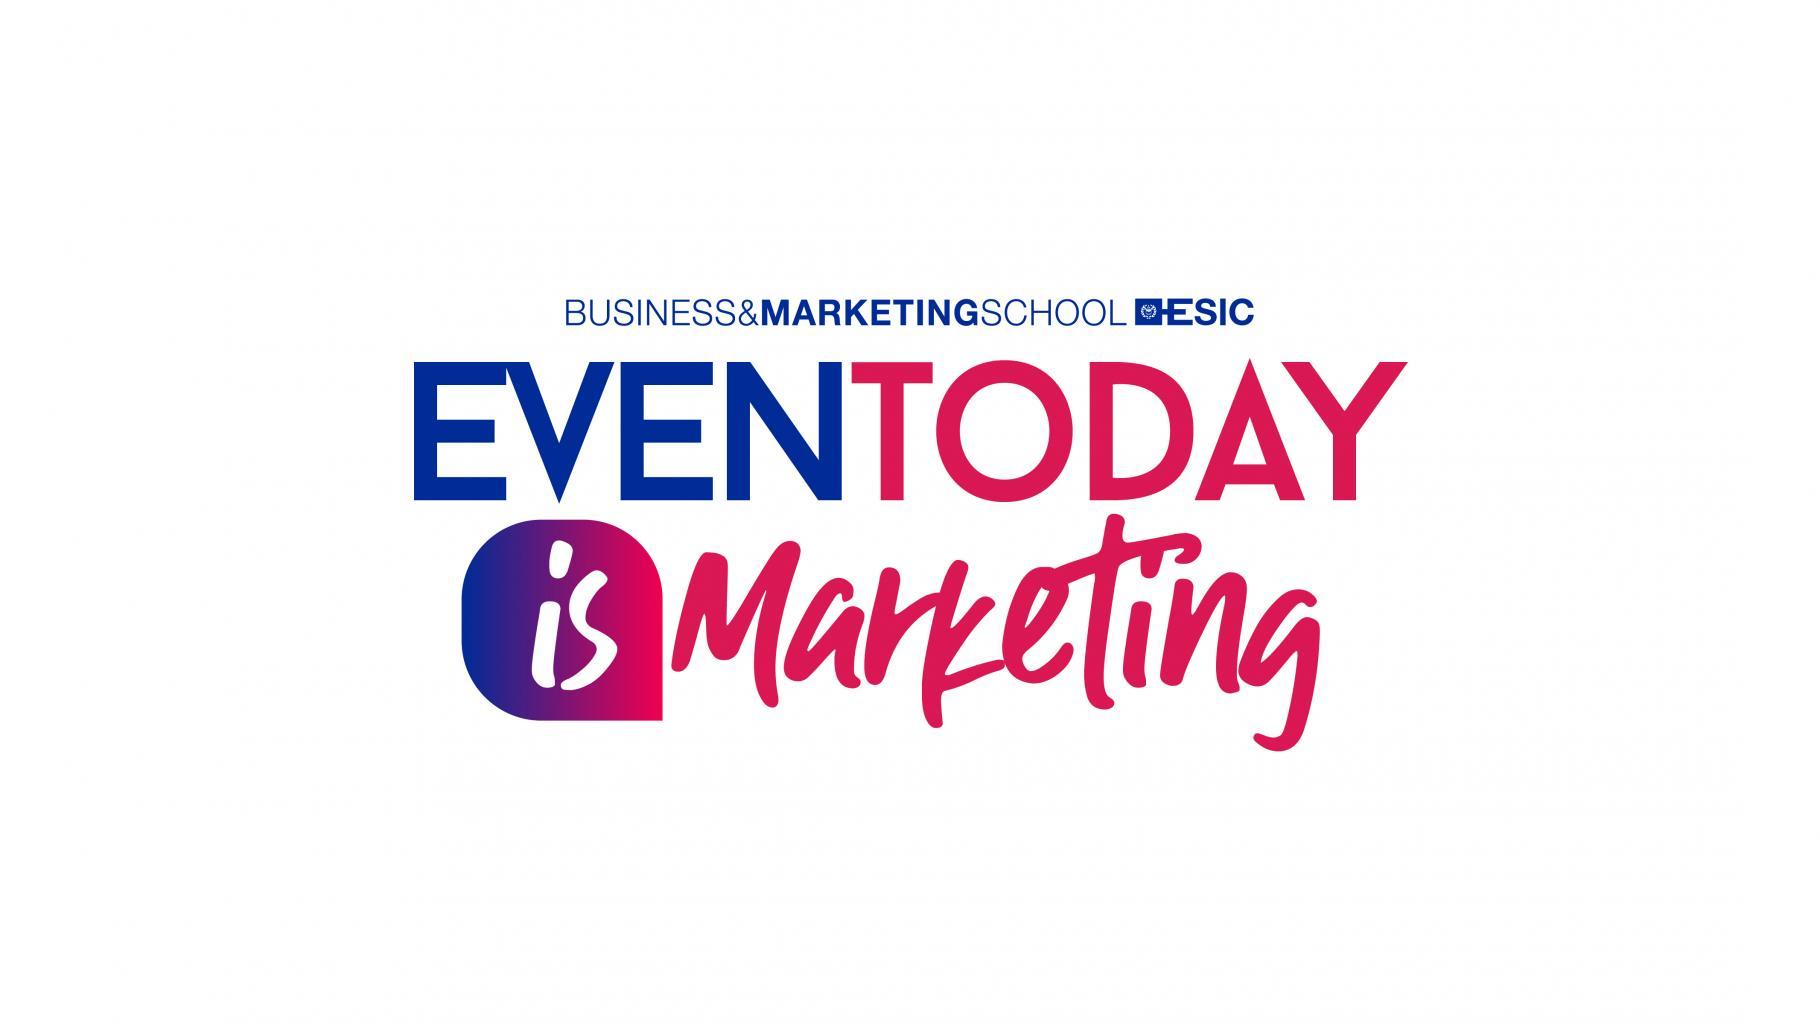 Even today is Marketing